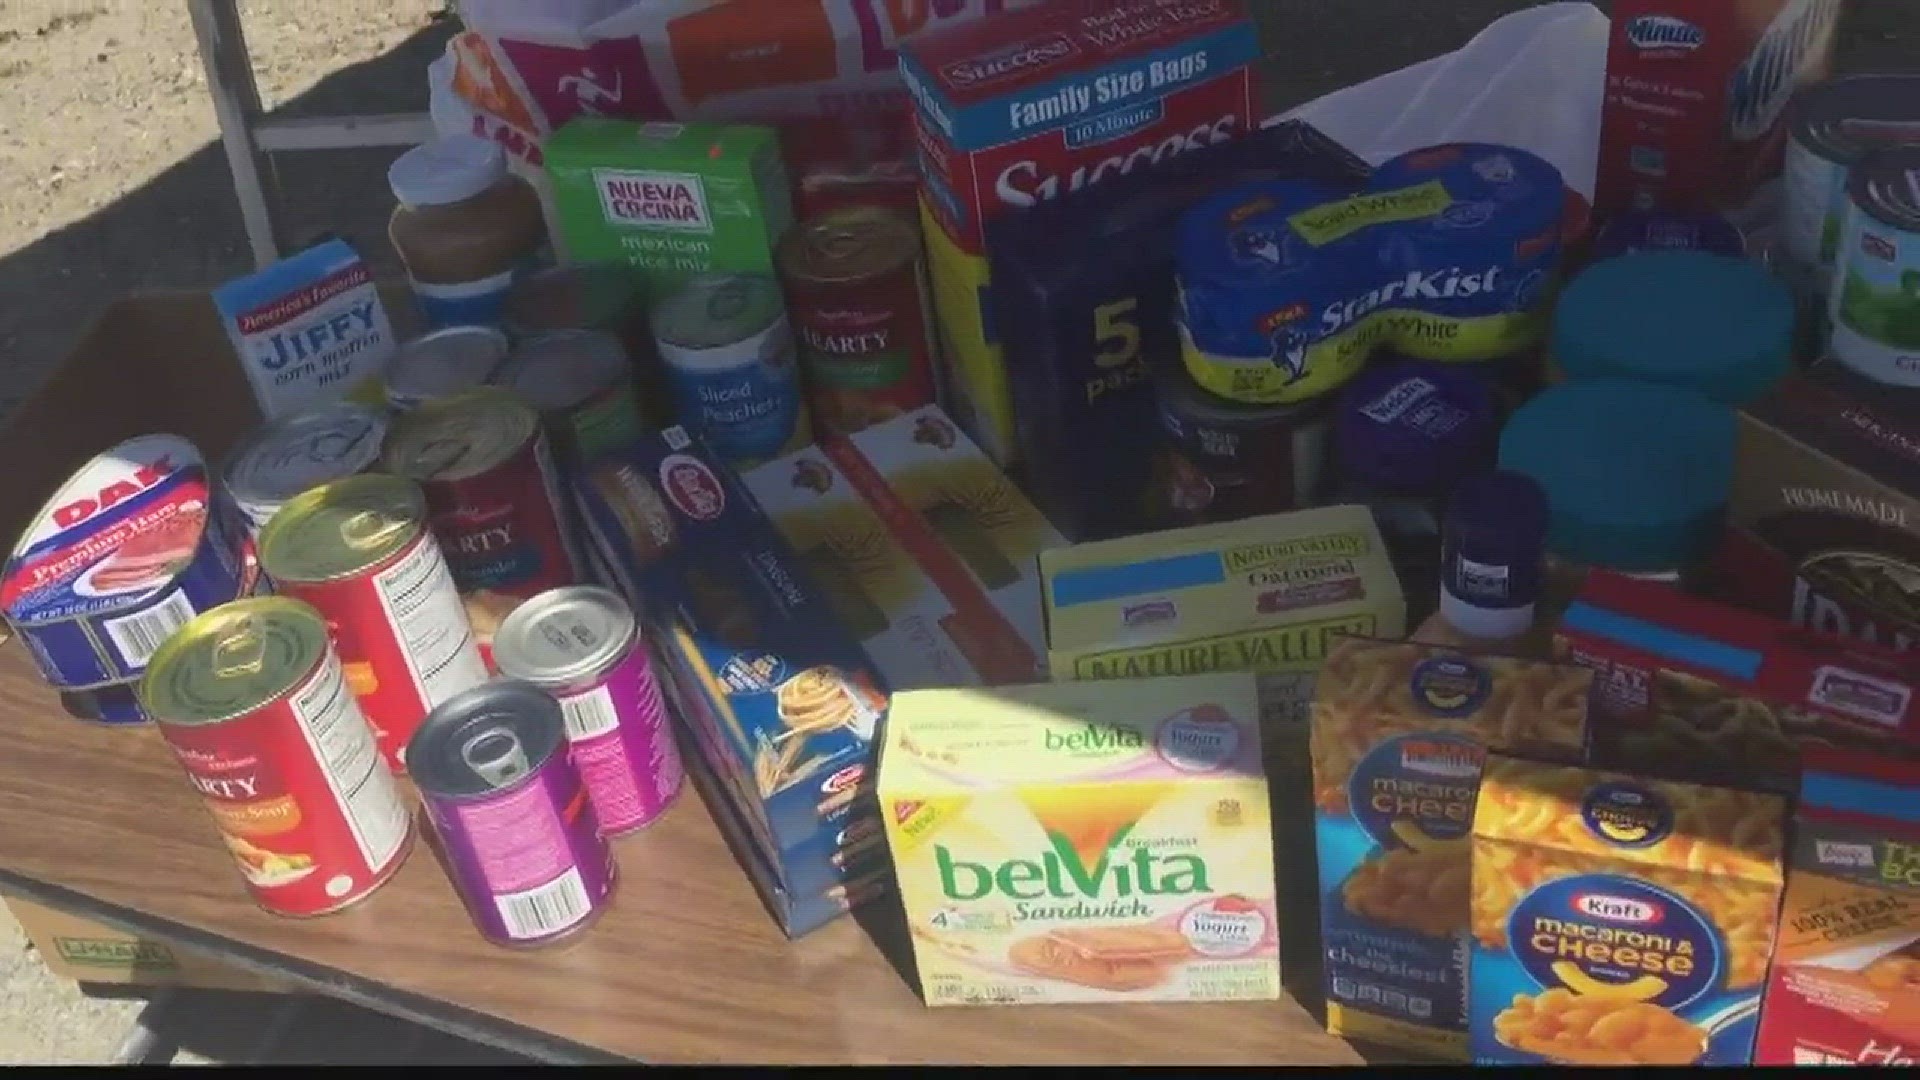 Maine Governor welcomes food drive participants.